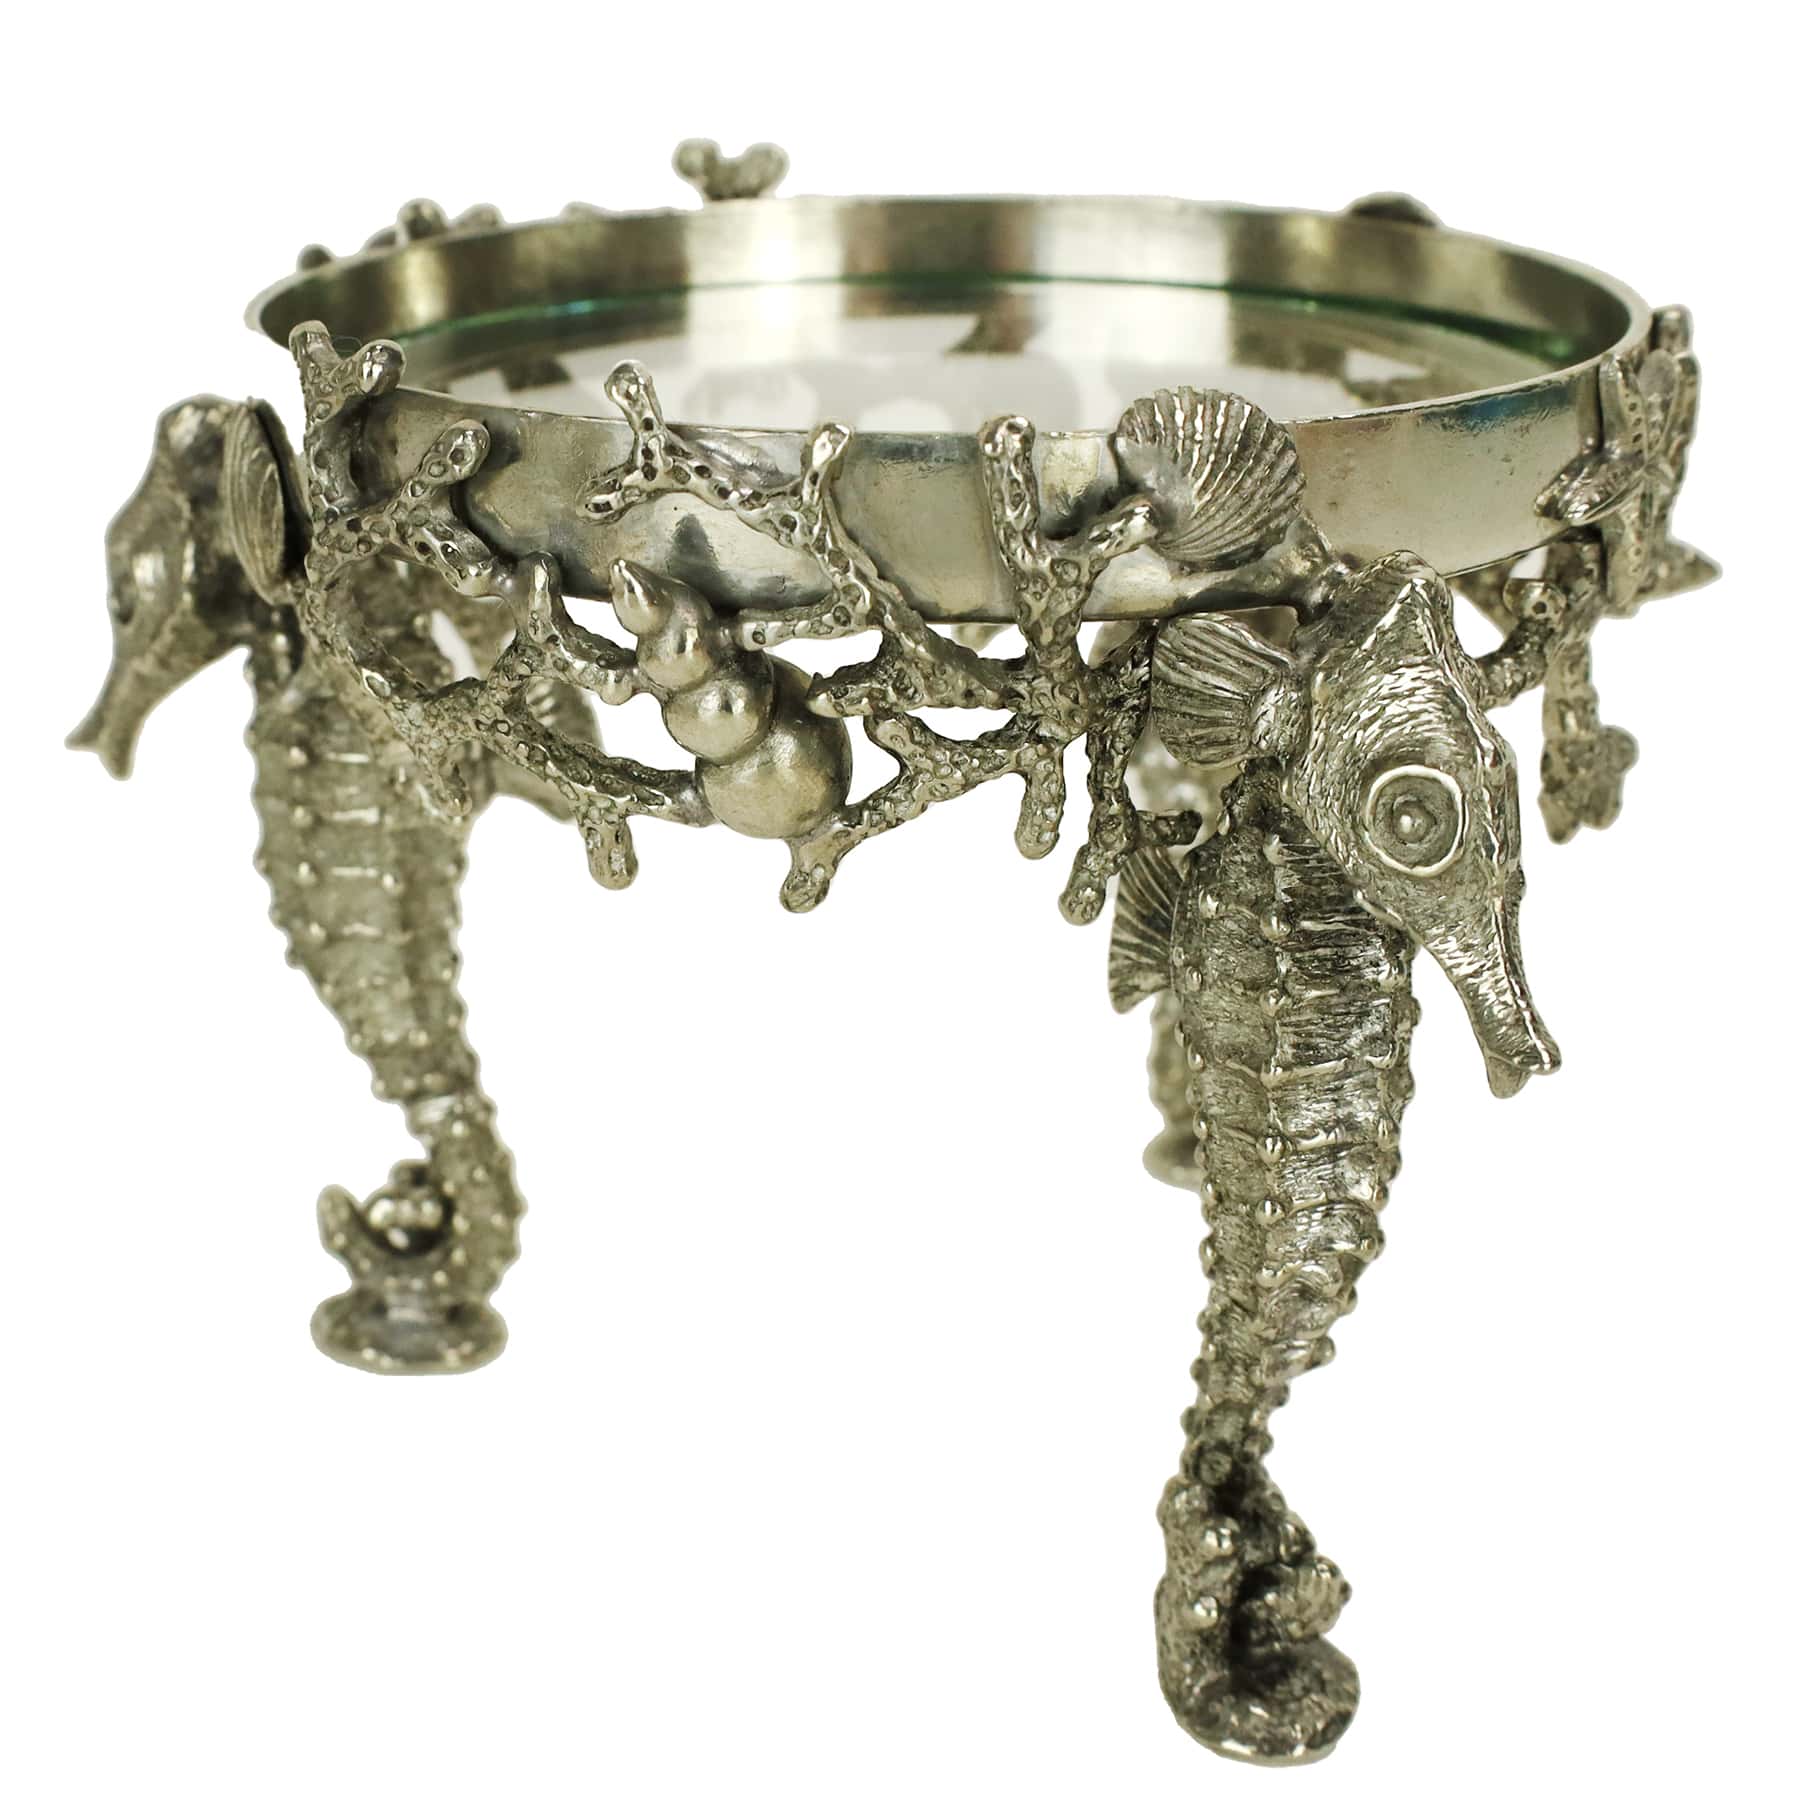 Close up shot of large Pewter Candle Holder featuring intricate seahorses as the base